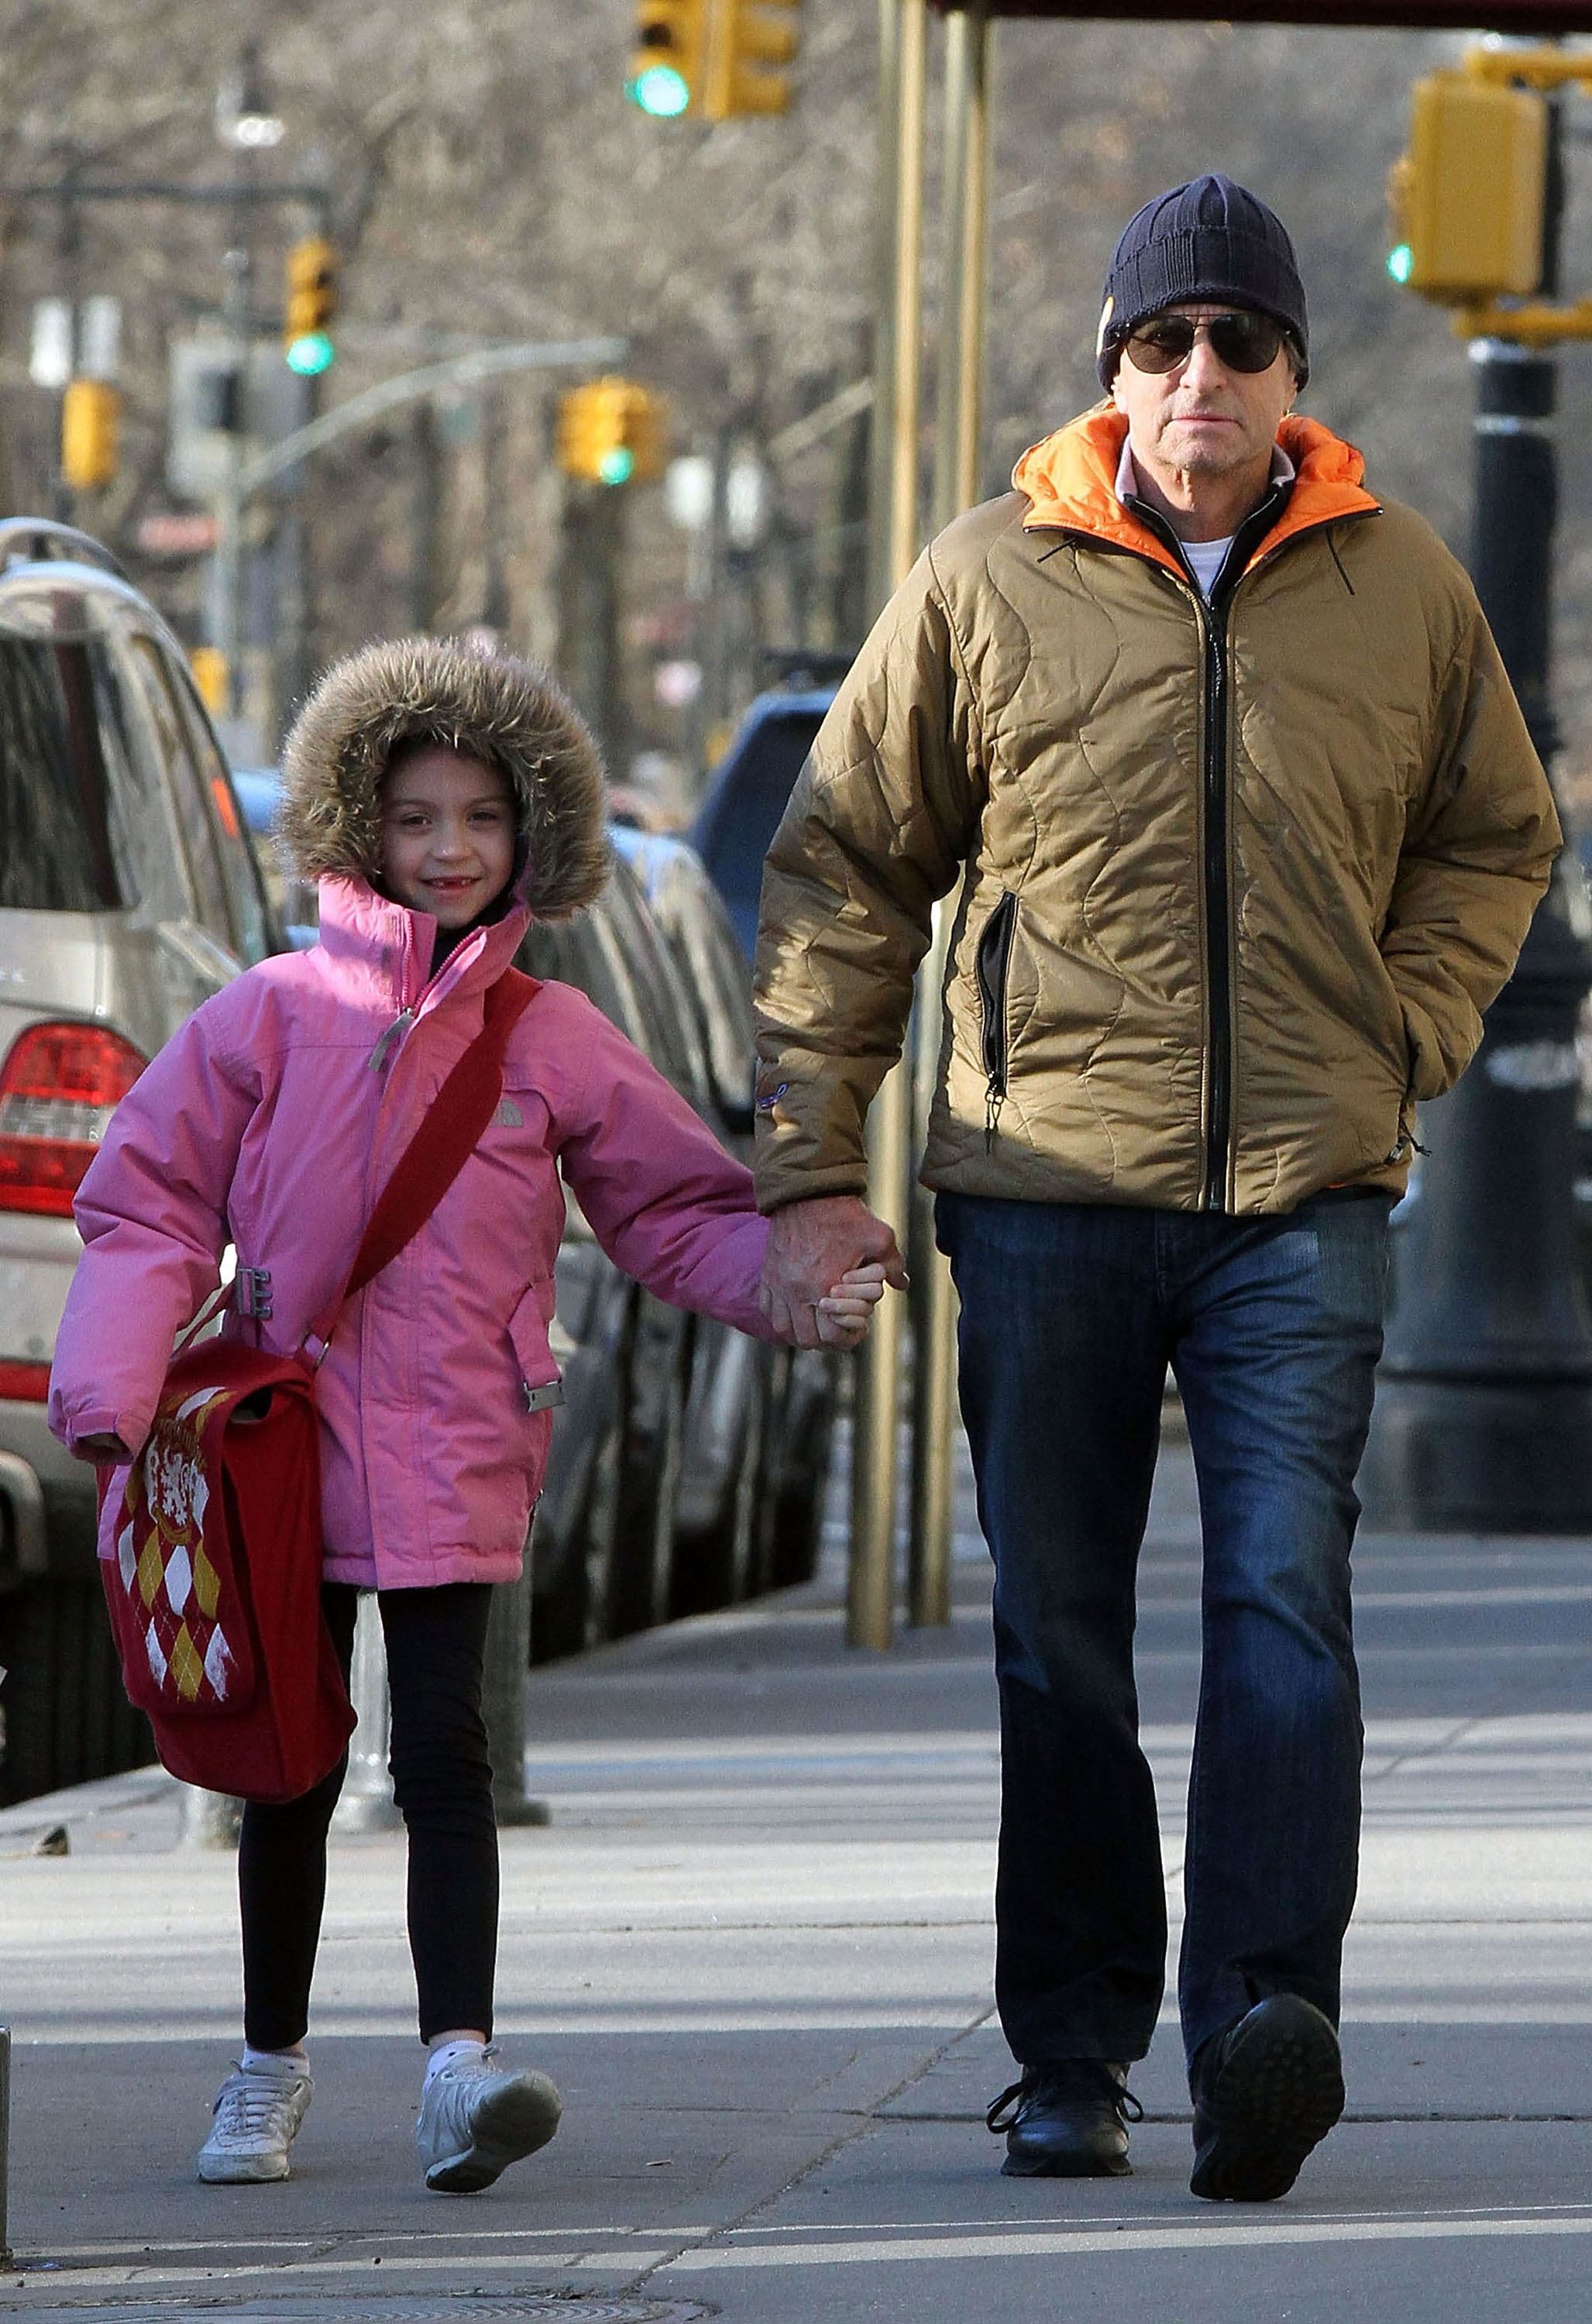 Michael Douglas and daughter Carys in New York City on March 03, 2011 | Source: Getty Images